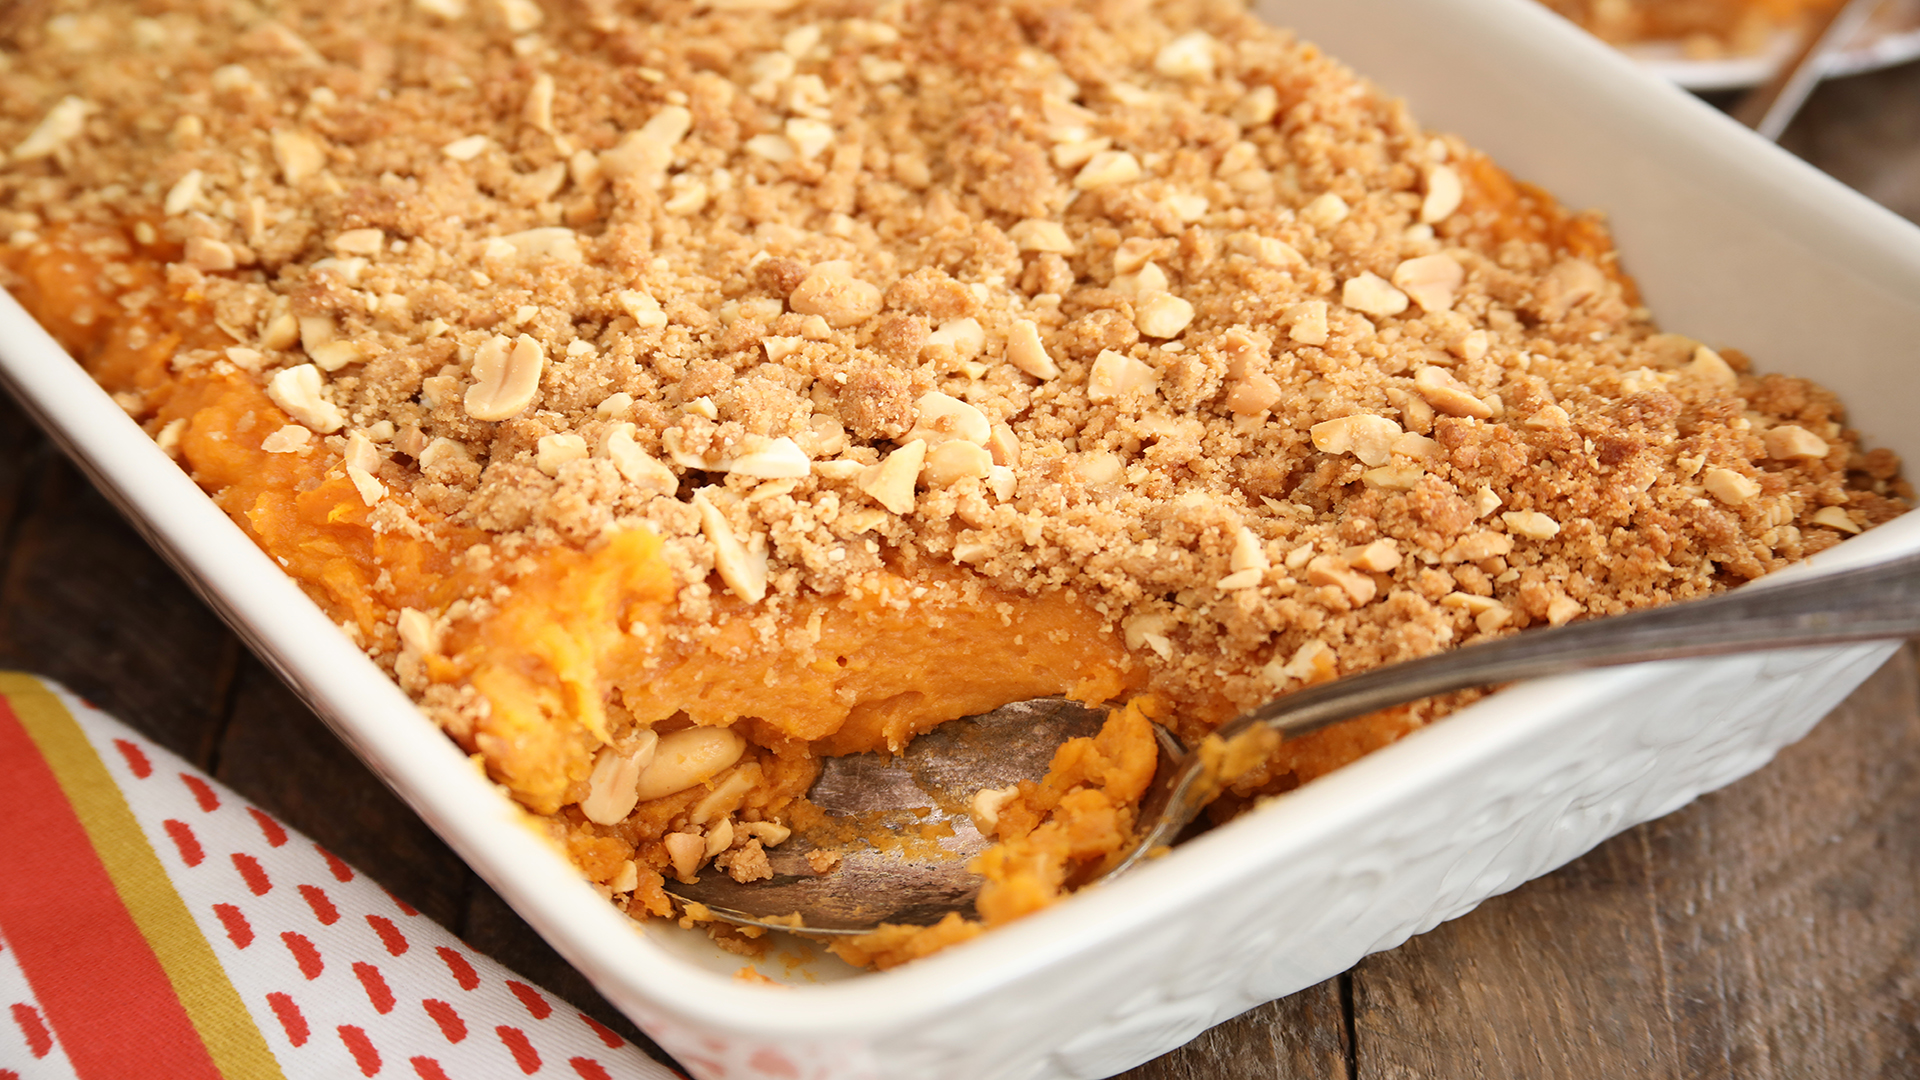 Put Some Peanuts on It: An epic twist to the traditional sweet potato casserole